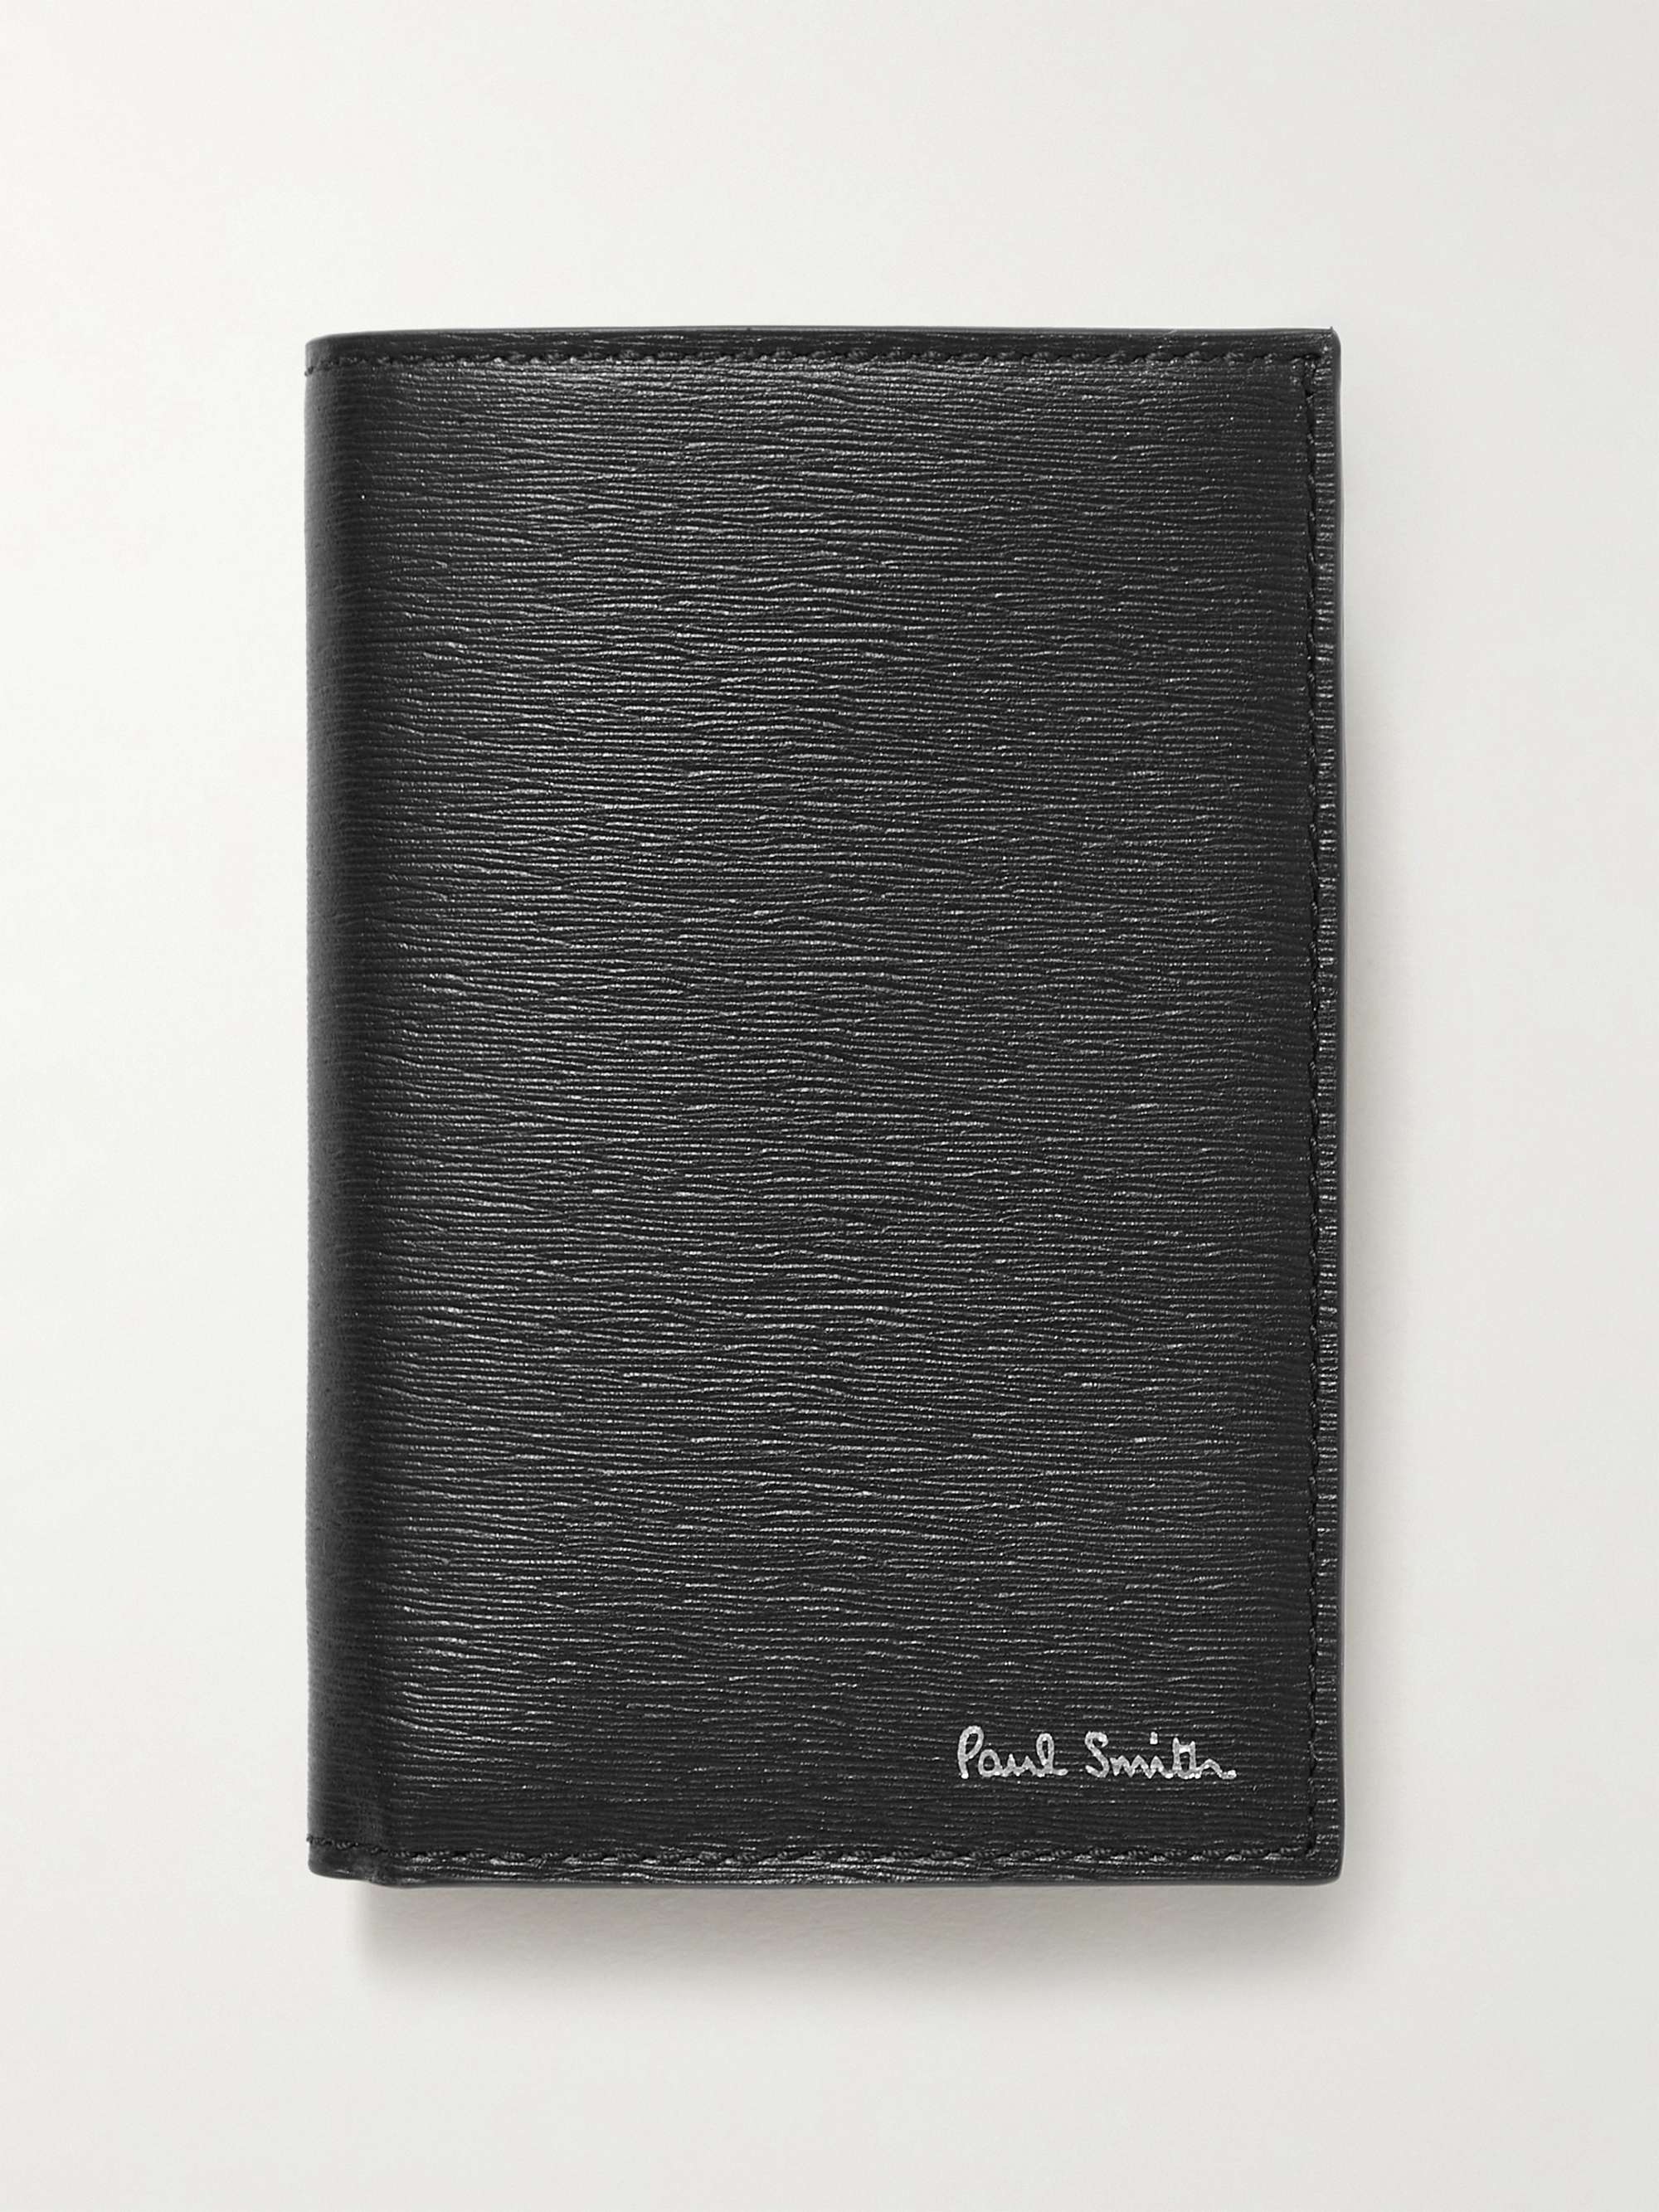 PAUL SMITH Textured-Leather Wallet | MR PORTER